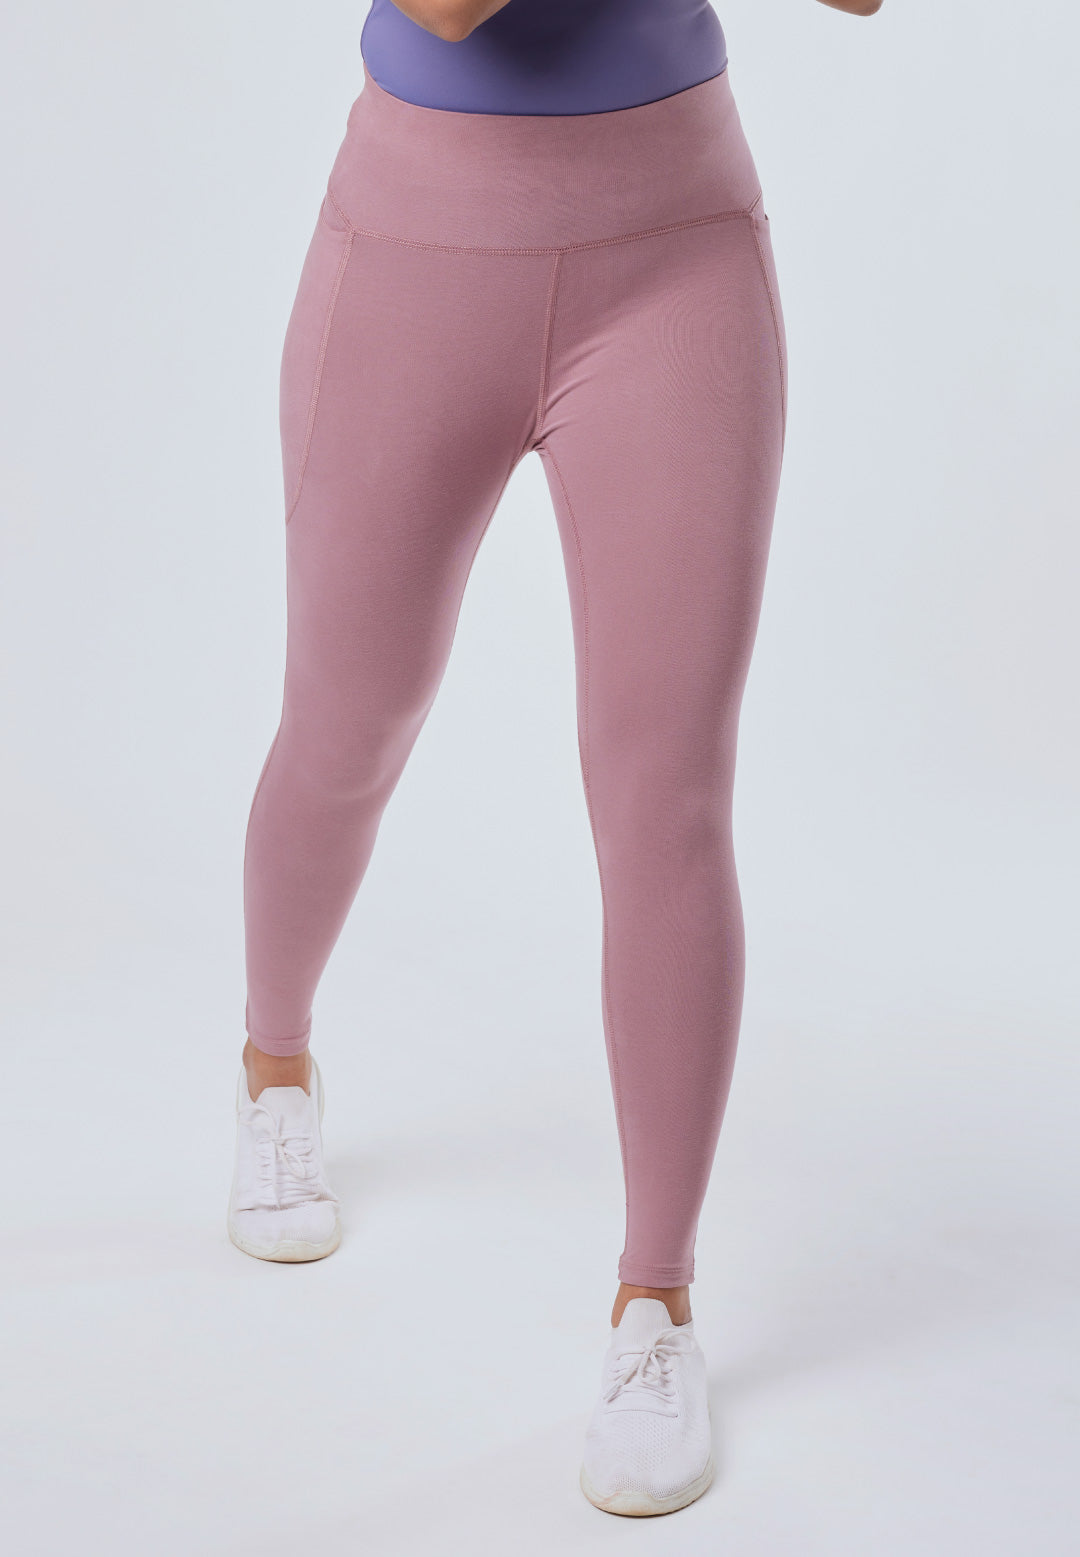 Buy FF High Waist Cotton Lycra Regular Slim Fit Women Leggings for Casual &  Formal Wear, Full Length Active Yoga Legging (Size - 30 to 38) (Dark Pink -  Size - 28 to 38) at Amazon.in